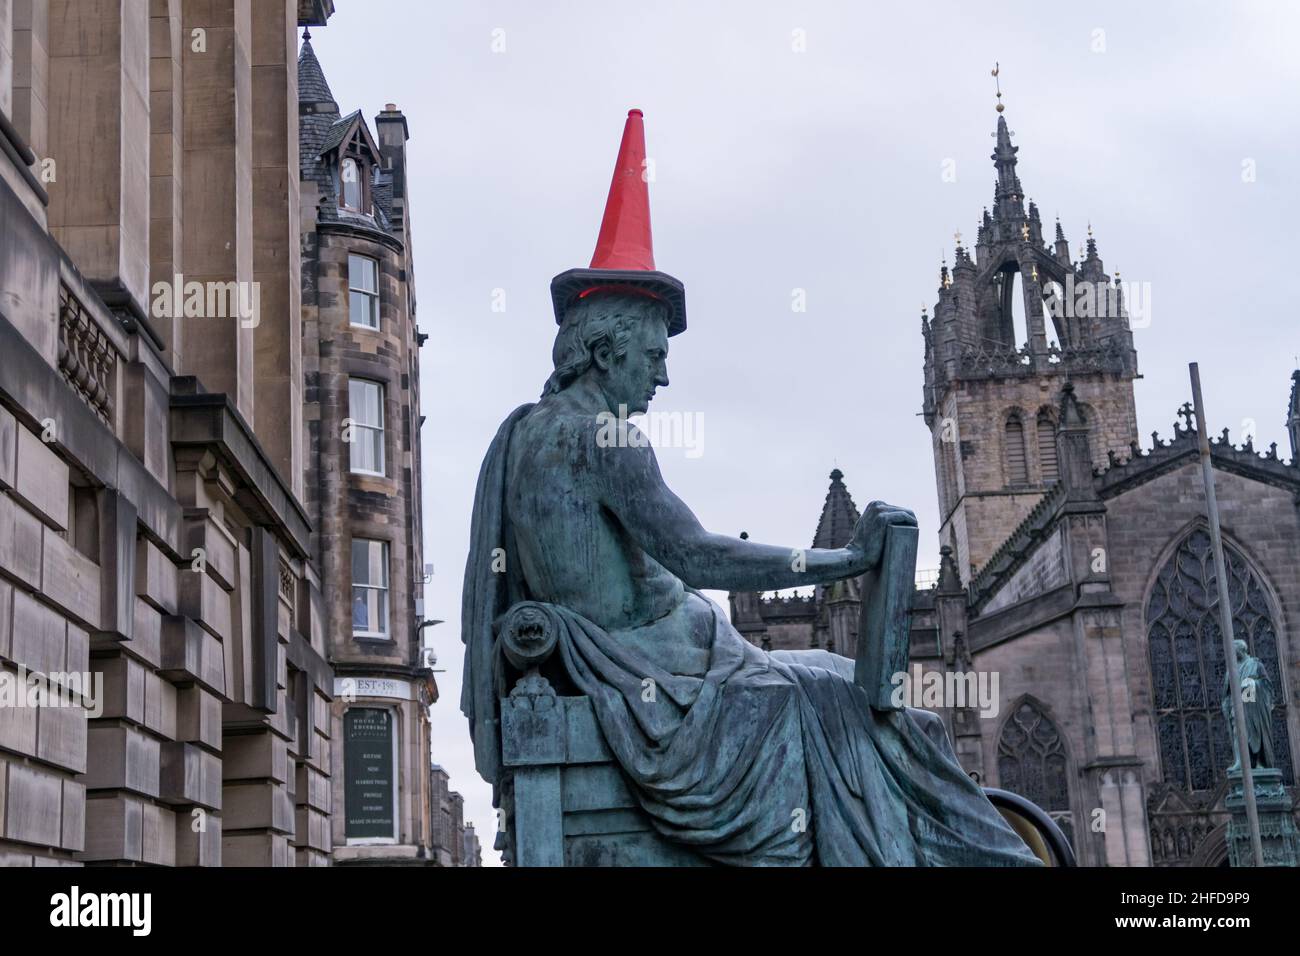 The statue of Scottish philosopher David Hume on Edinburgh's Royal Mile, with a red traffic cone on its head Stock Photo